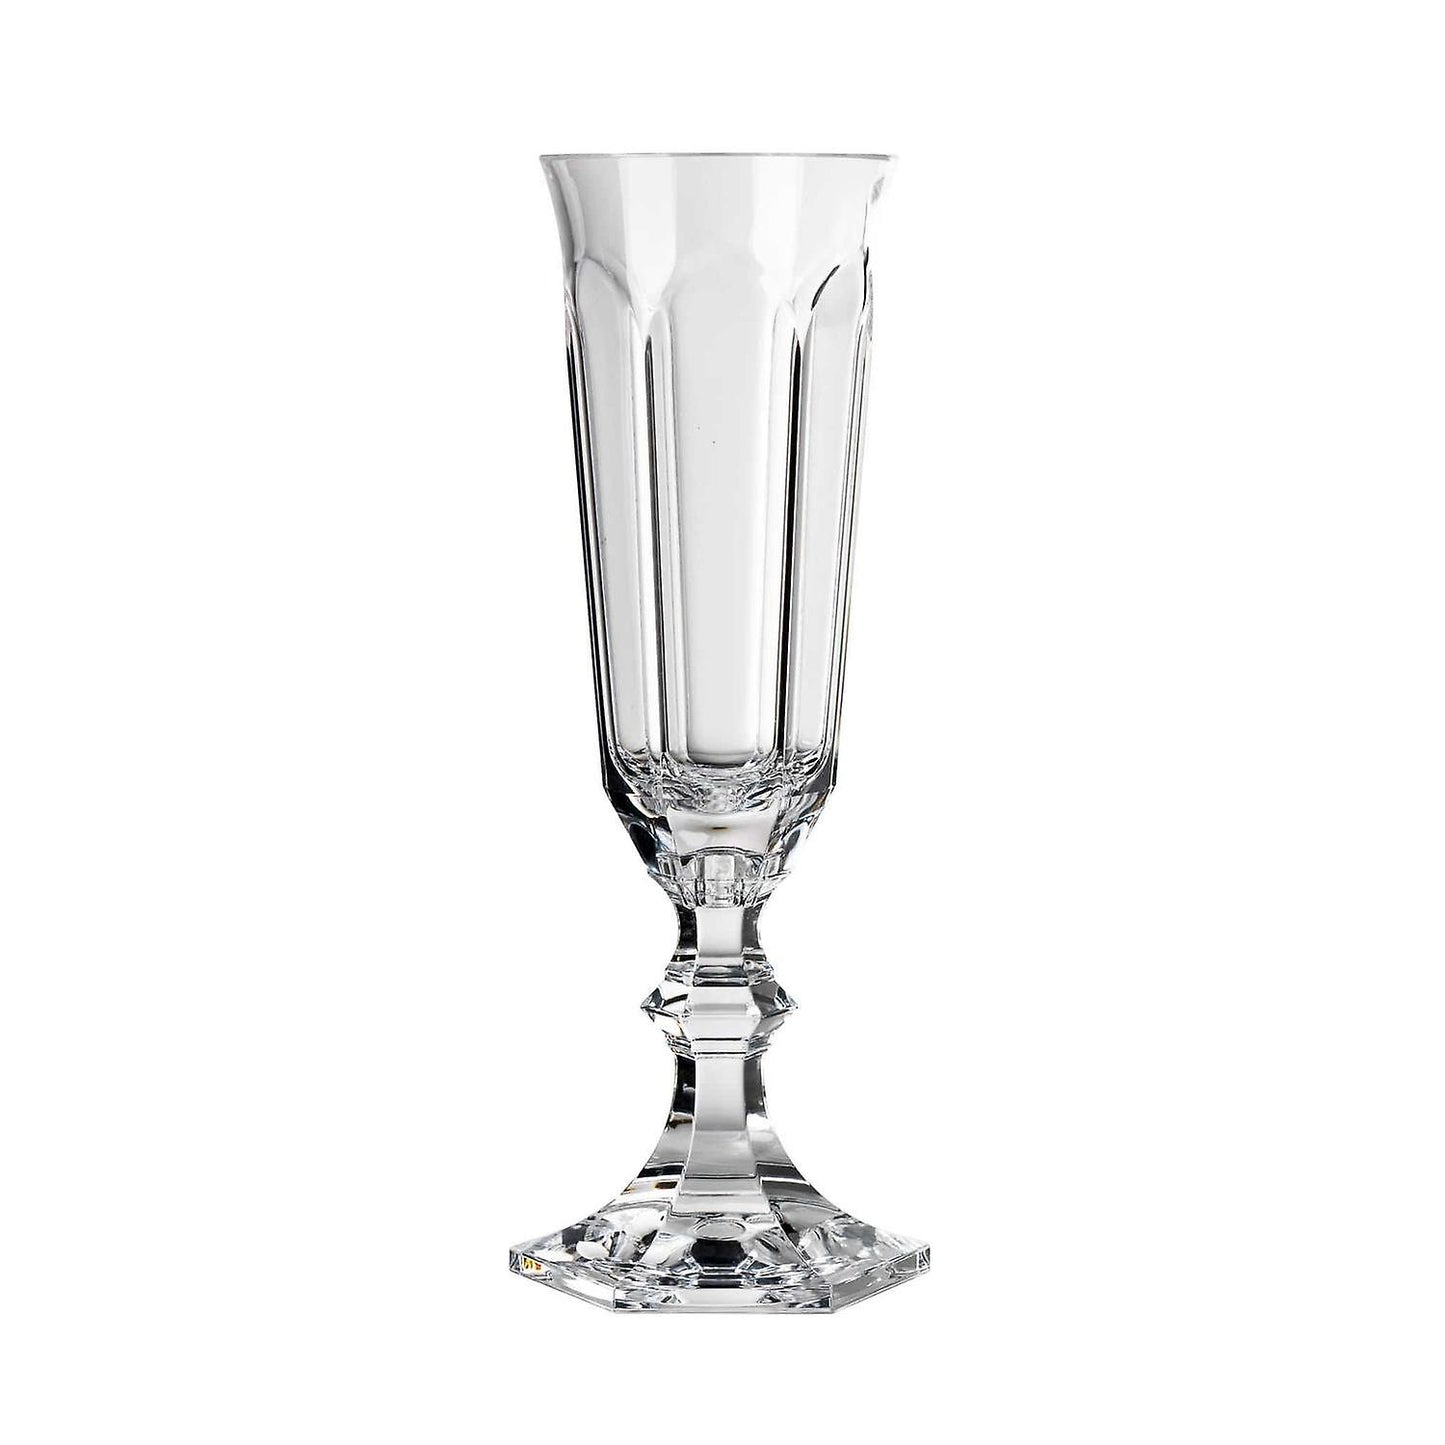 CHAMPAGNE FLUTE DOLCE VITA CLEAR - Set of 6